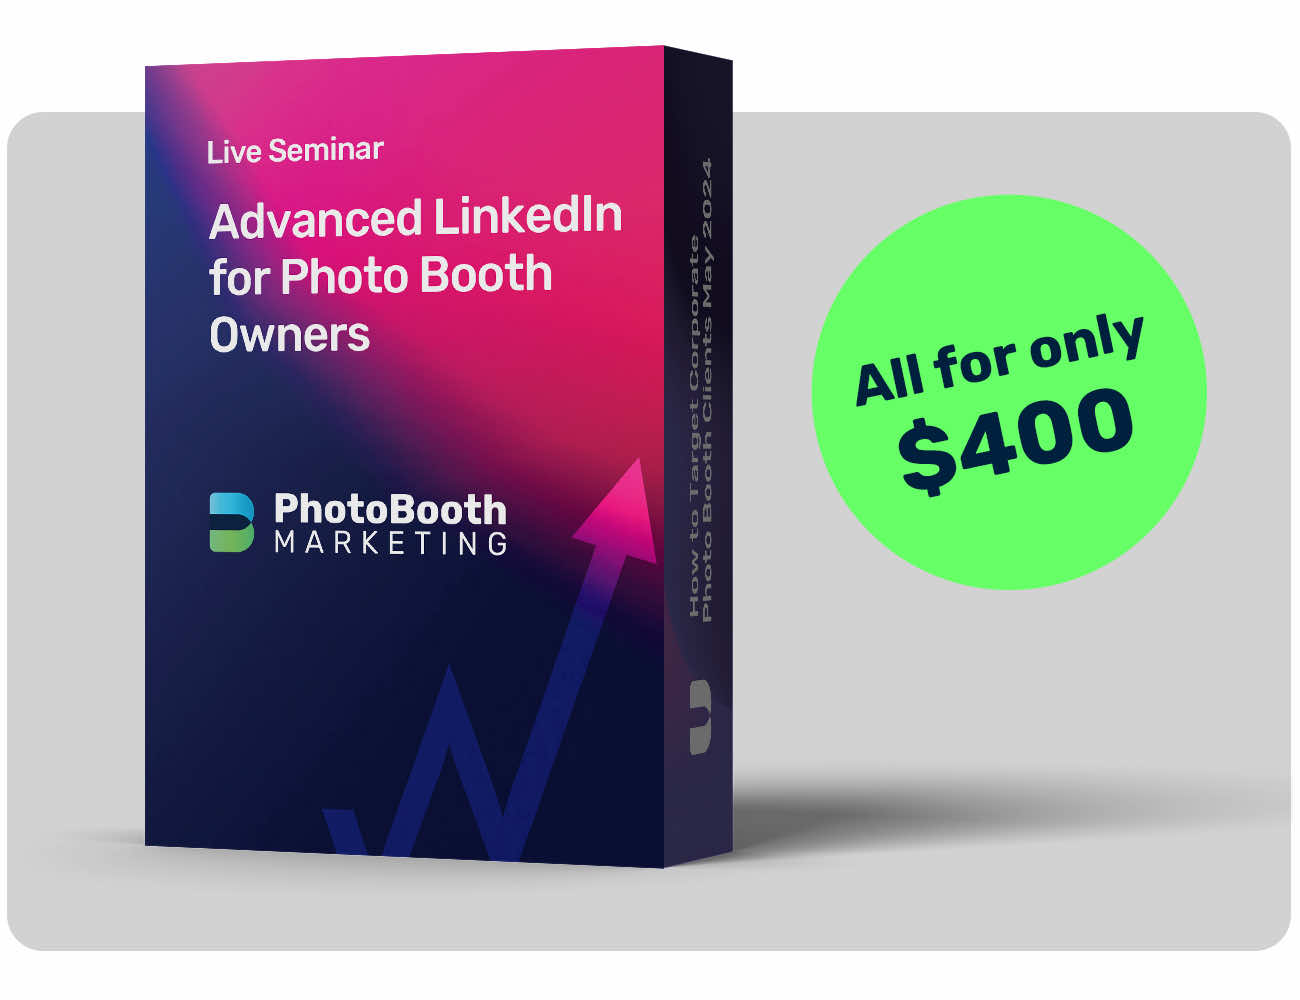 Advanced LinkedIn for Photo Booth Owners